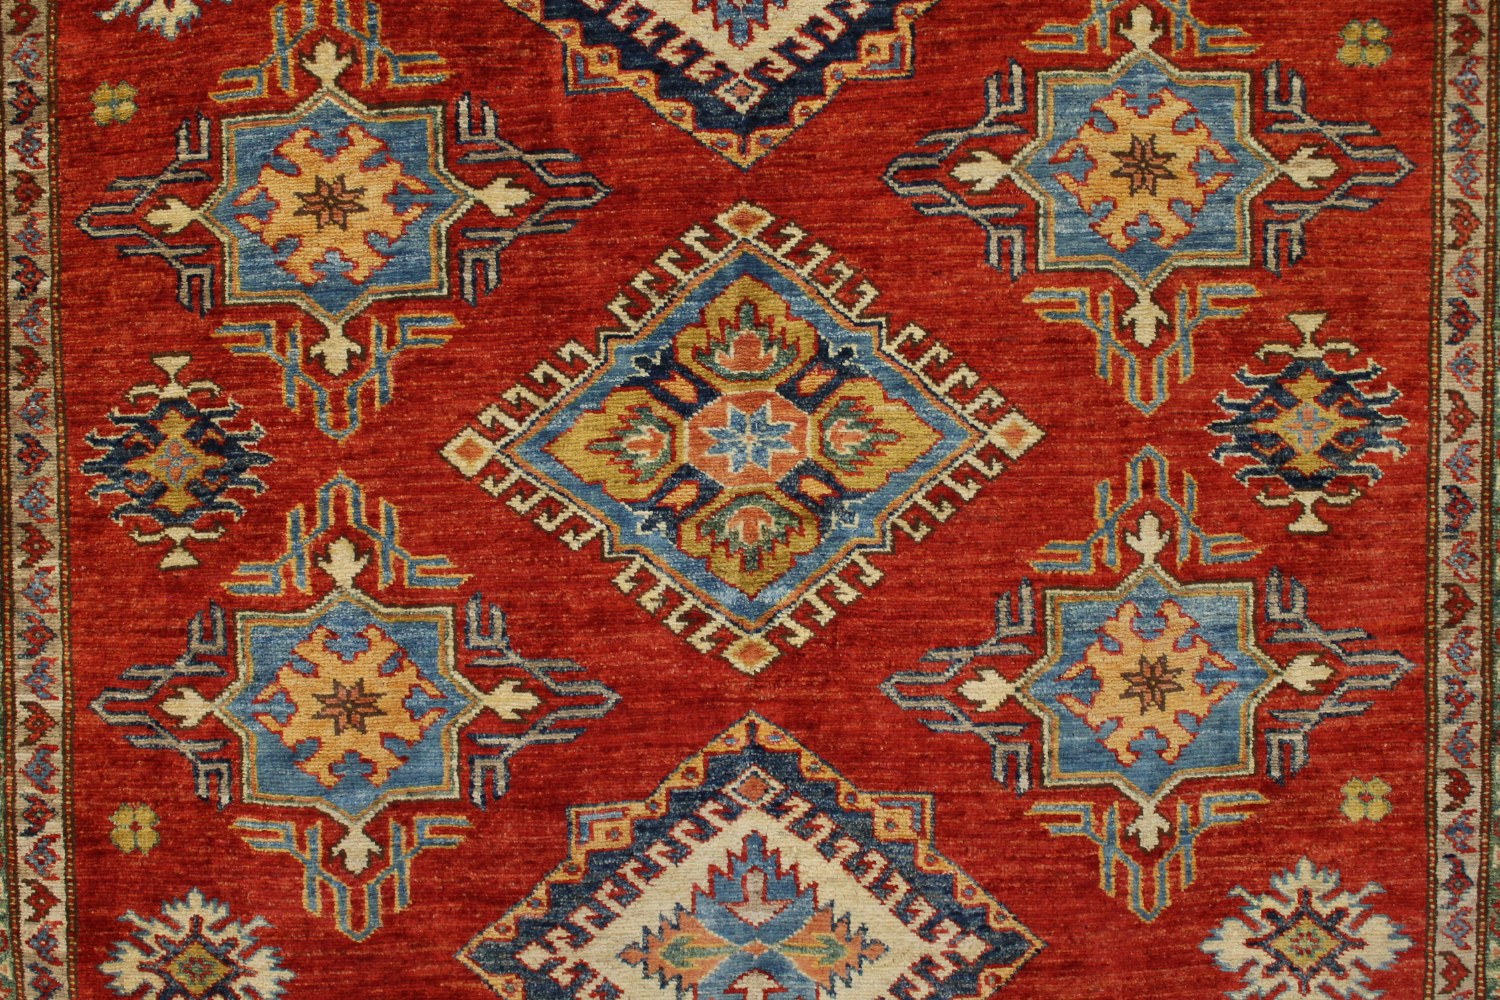 6x9 Kazak Hand Knotted Wool Area Rug - MR022816